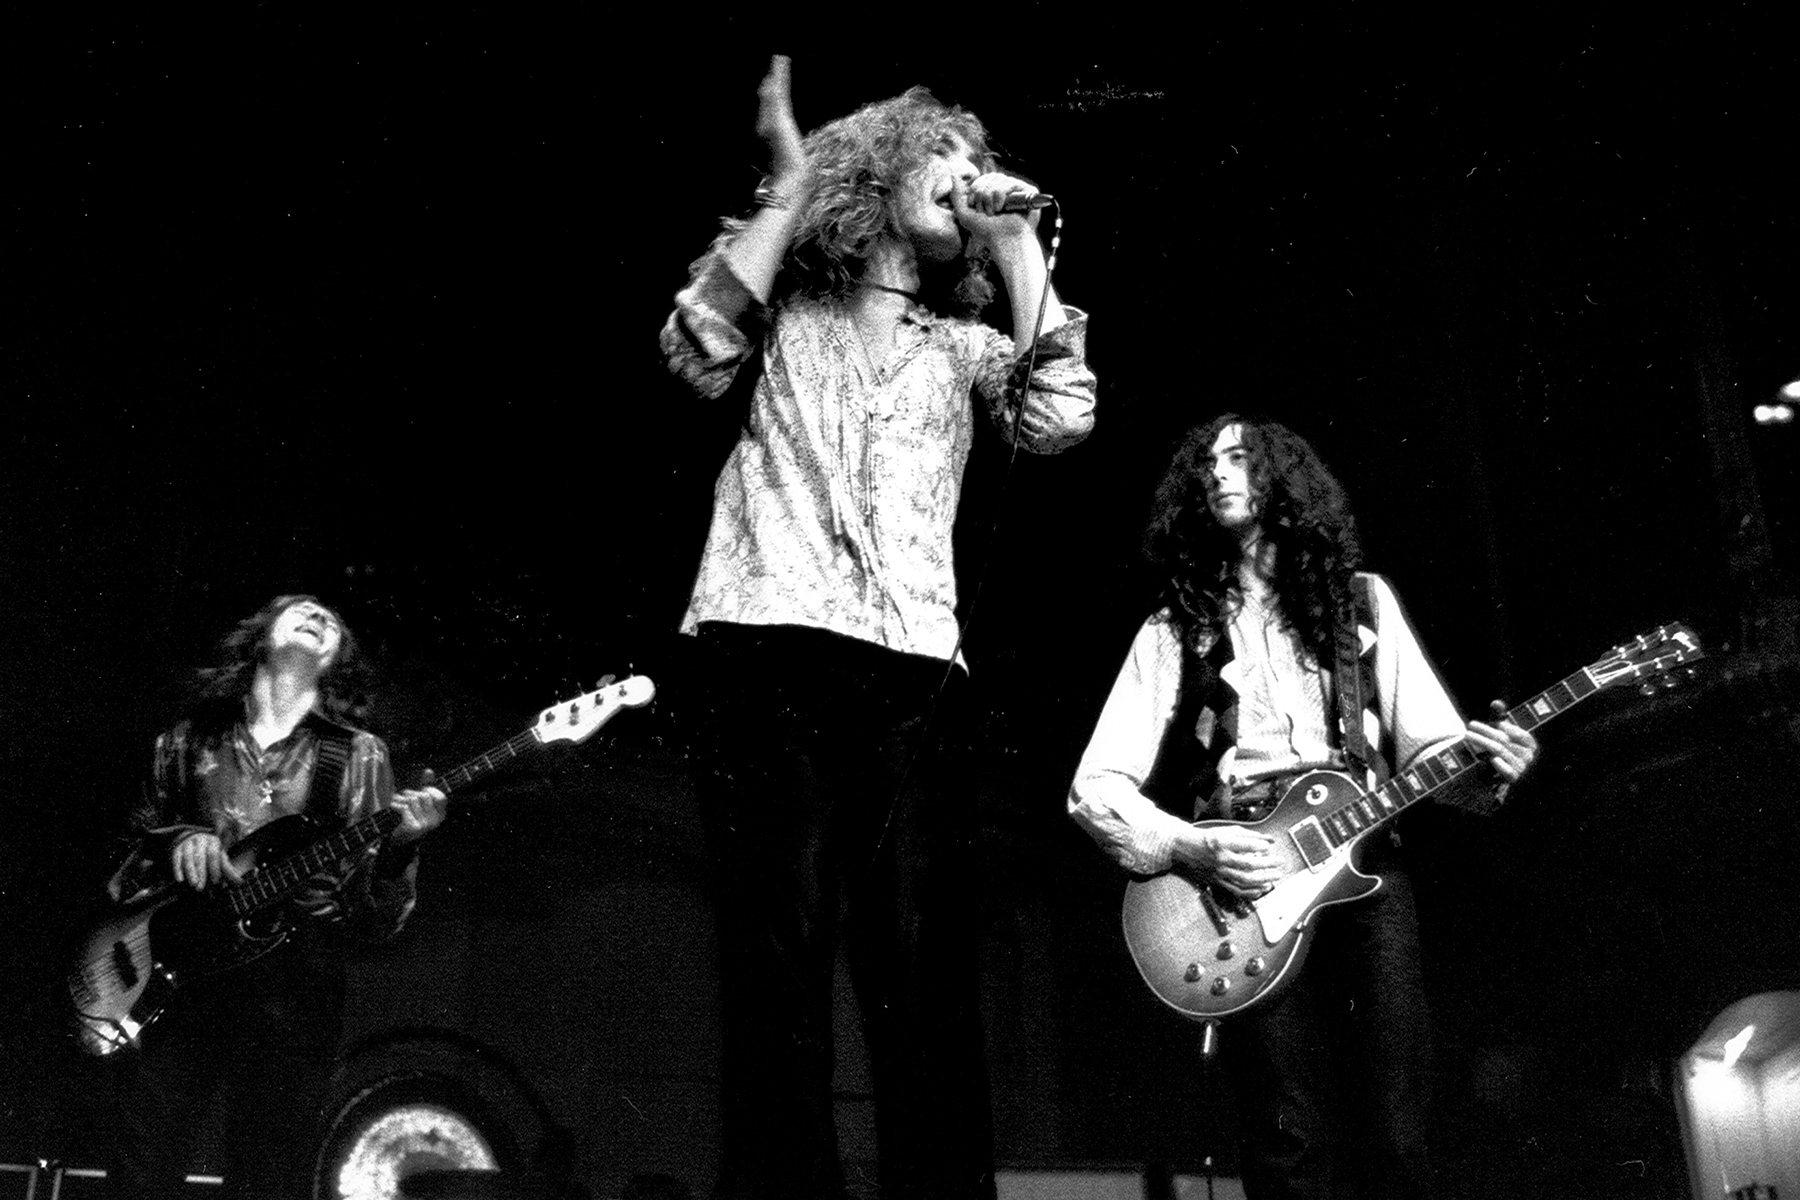 DUSSELDORF - MARCH 11: Singer Robert Plant, bassist John Paul Jones and guitarist Jimmy Page of the rock band 'Led Zeppelin' perform onstage on March 11, 1970 in Dusseldorf, Germany. (Photo by Michael Ochs Archives/Getty Images)